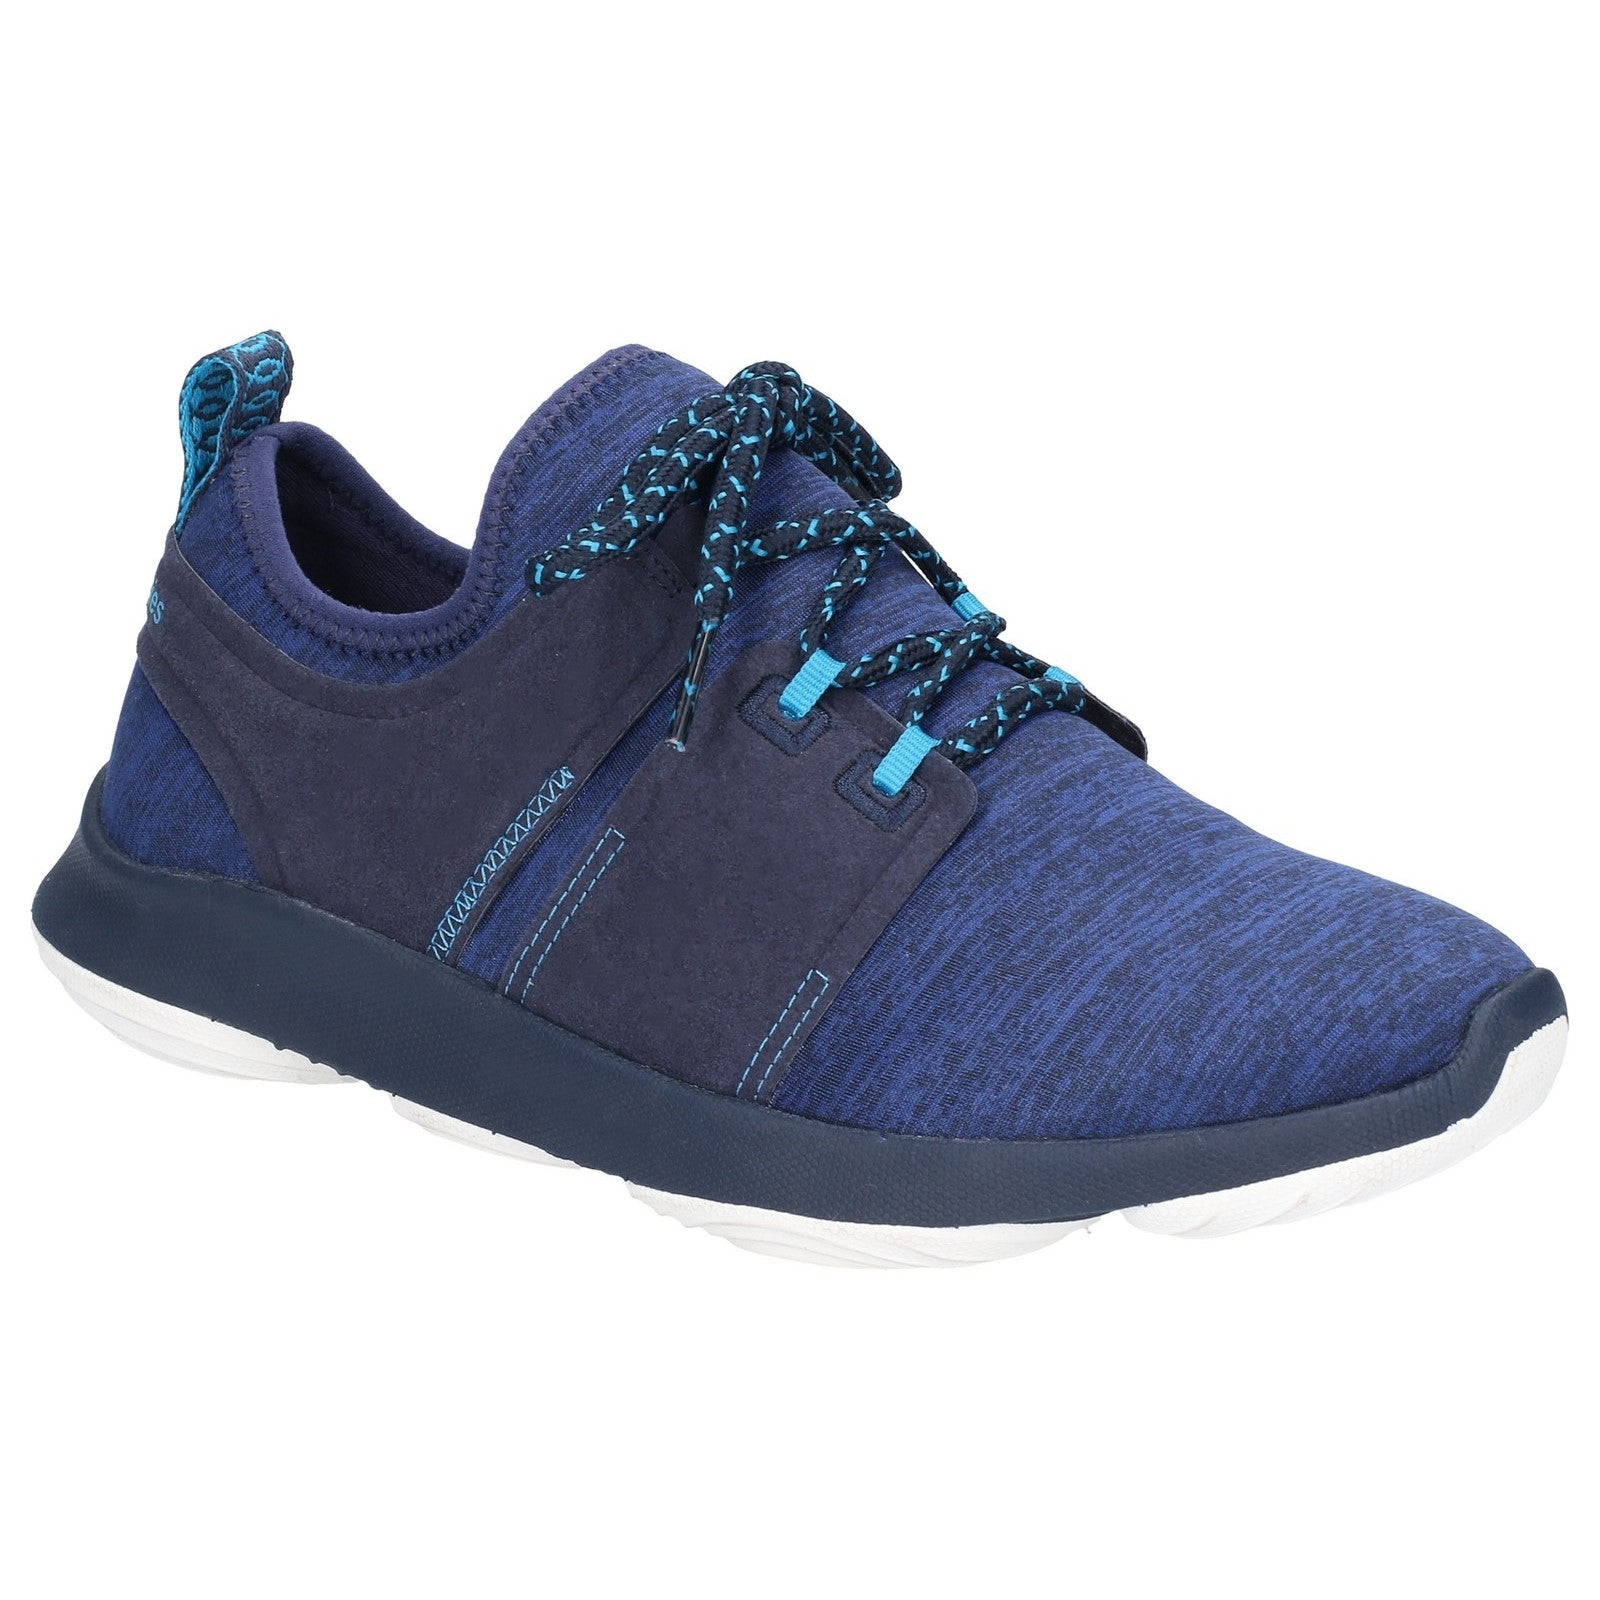 Hush Puppies Geo BounceMax Lace Up Trainer